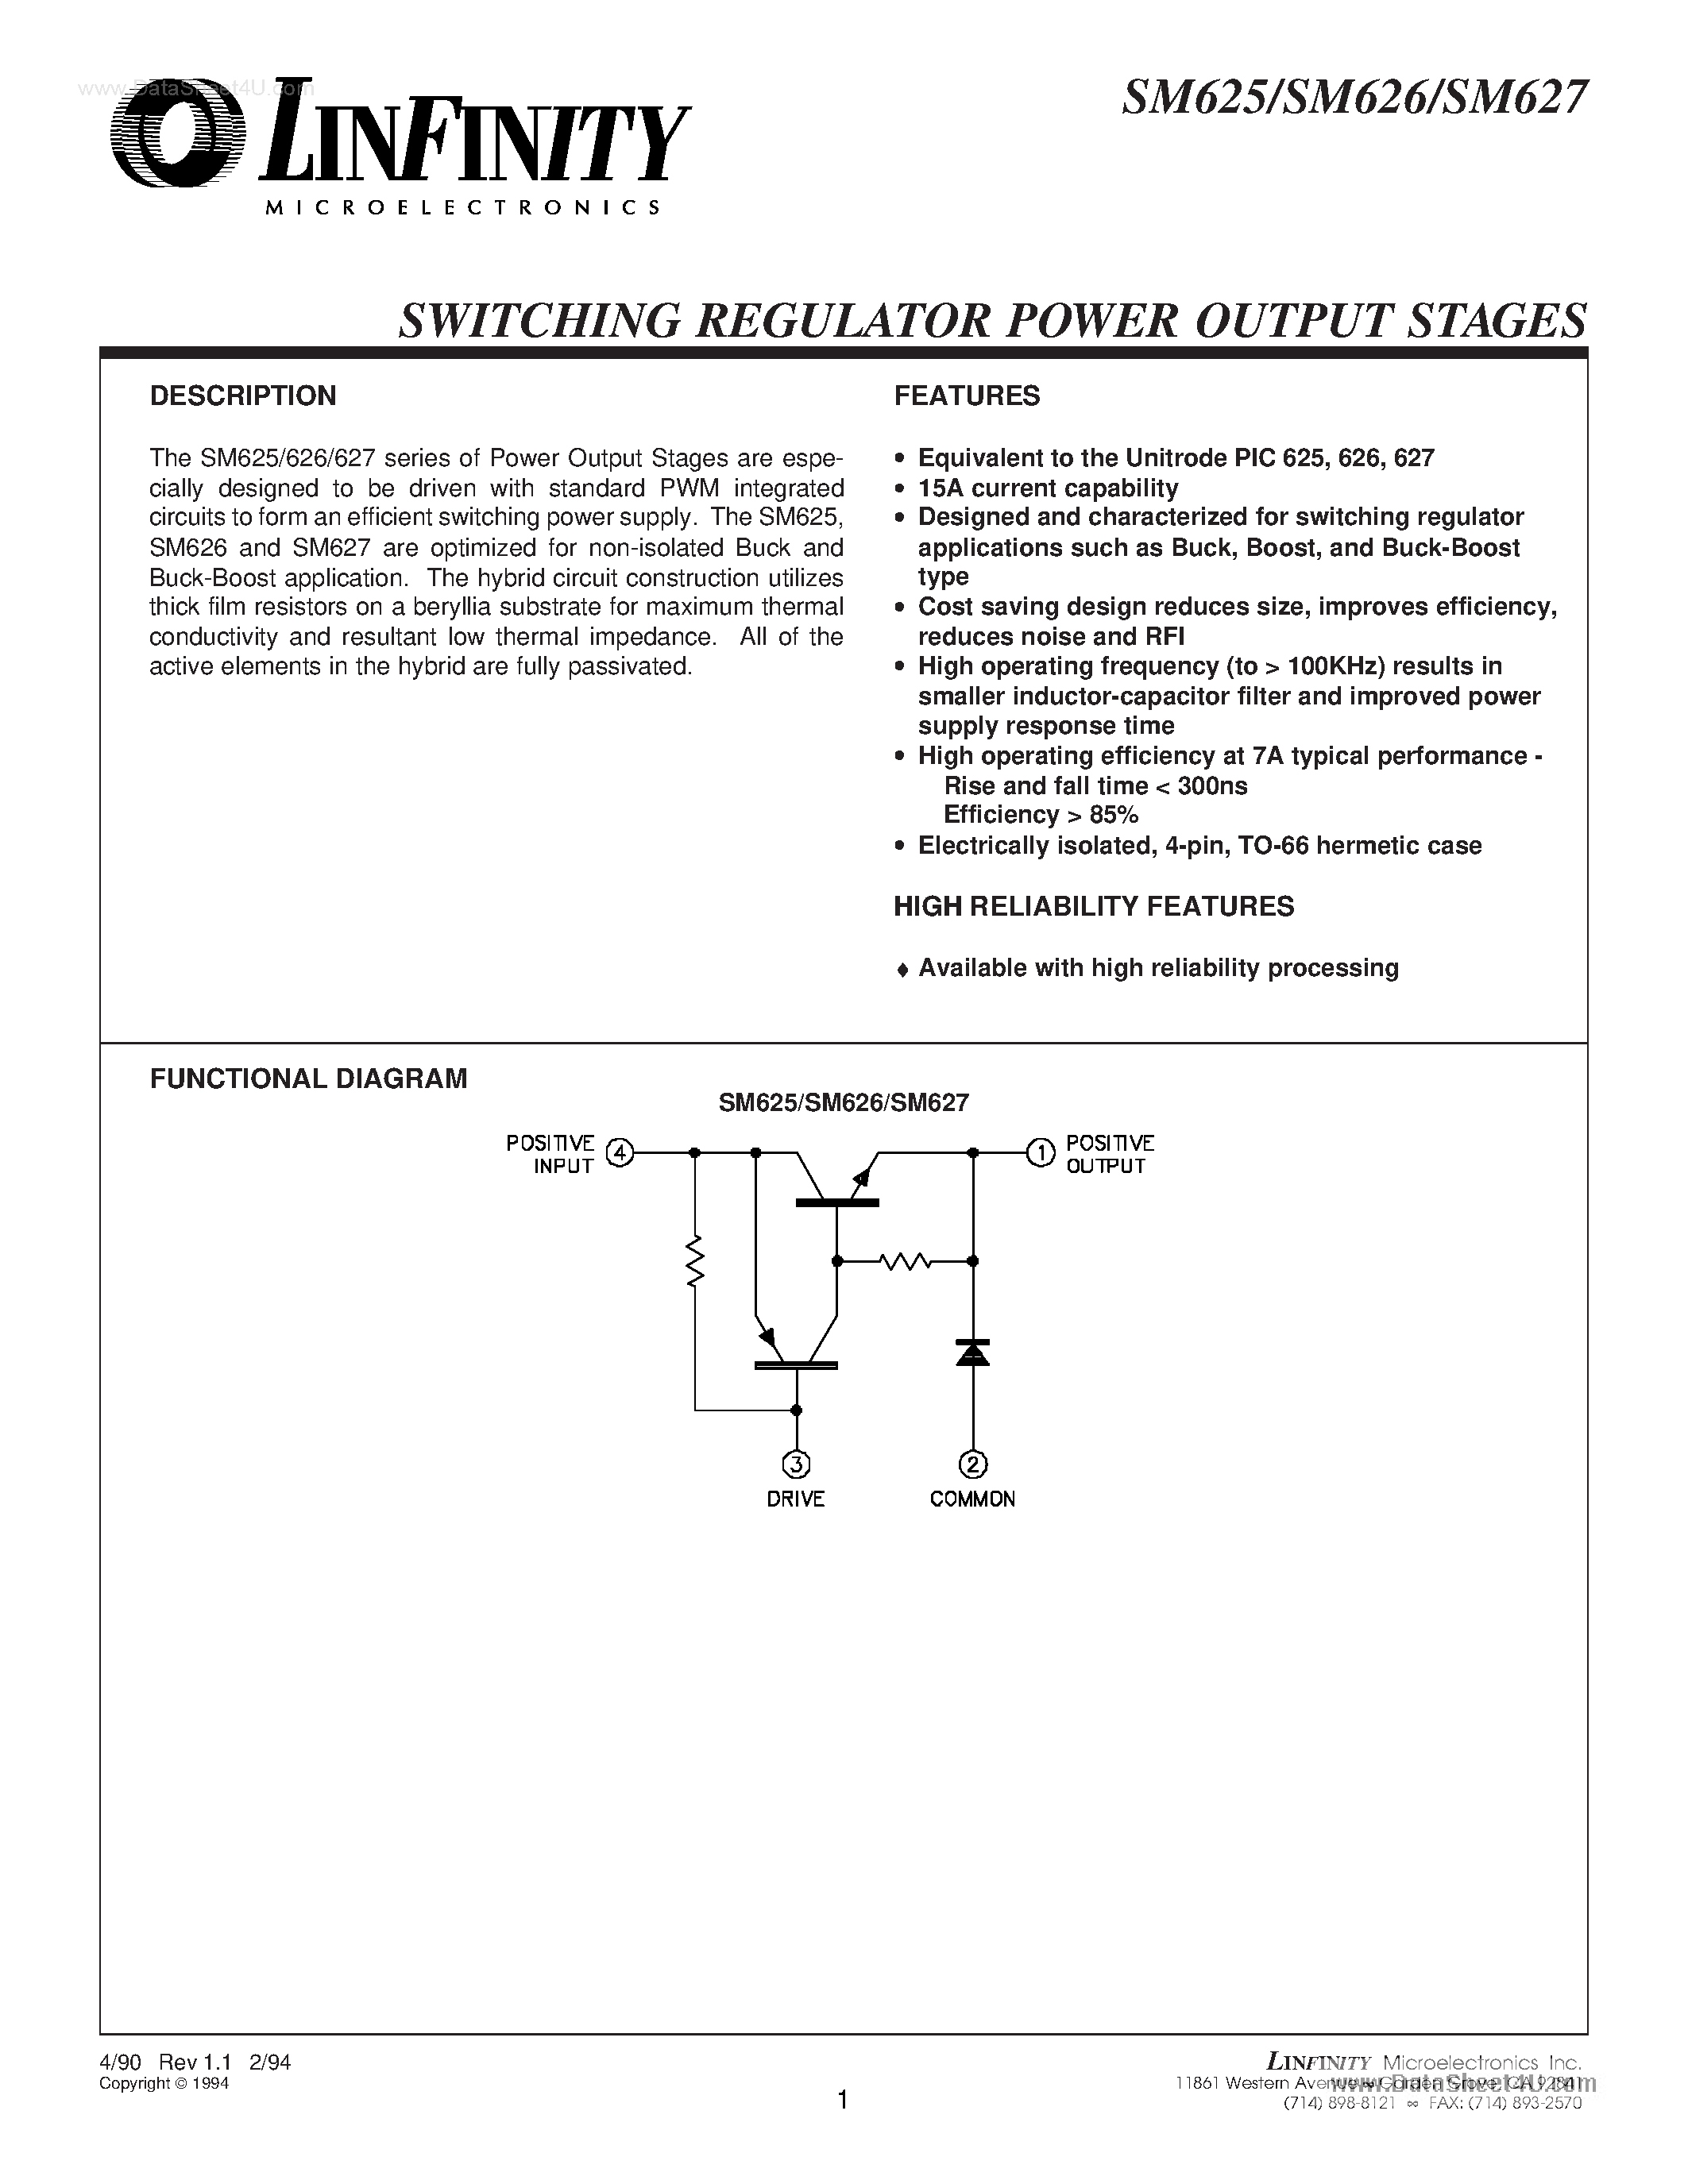 Datasheet SM626 - (SM62x) SWITCHING REGULATOR POWER OUTPUT STAGES page 1